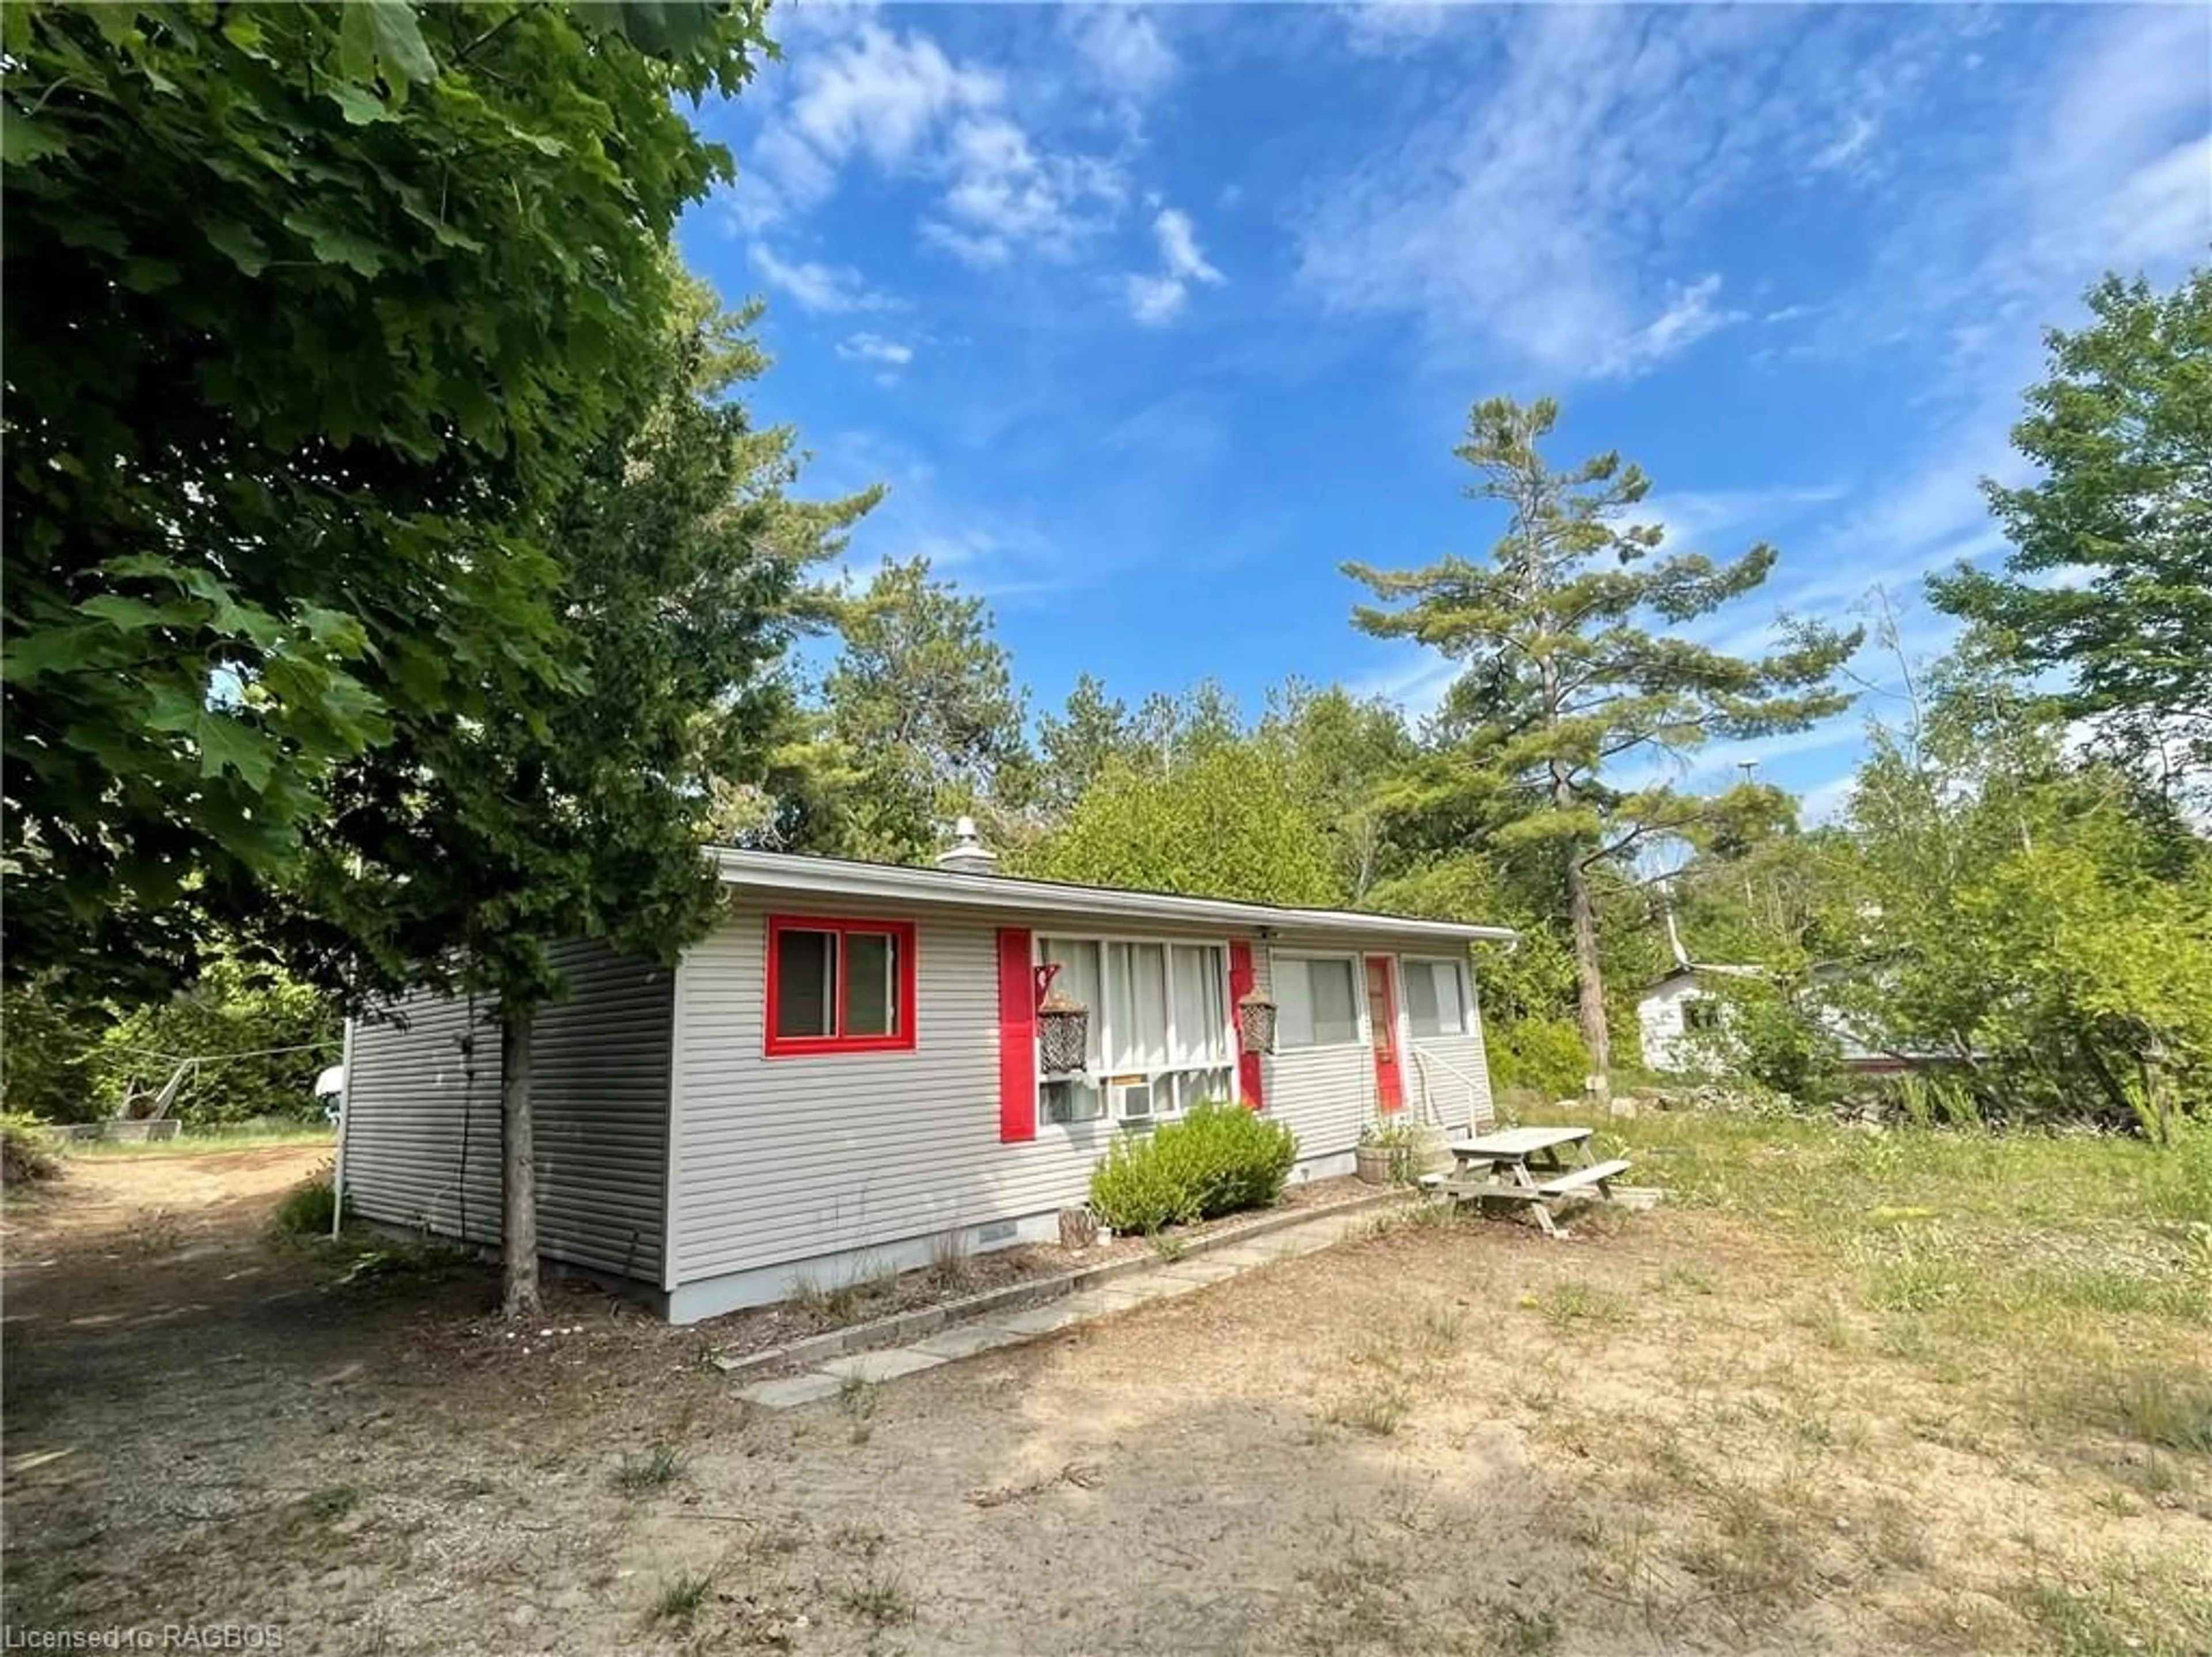 Cottage for 270 Ogimah Rd, Chief's Point Indian Reserve #28 Ontario N0H 2G0